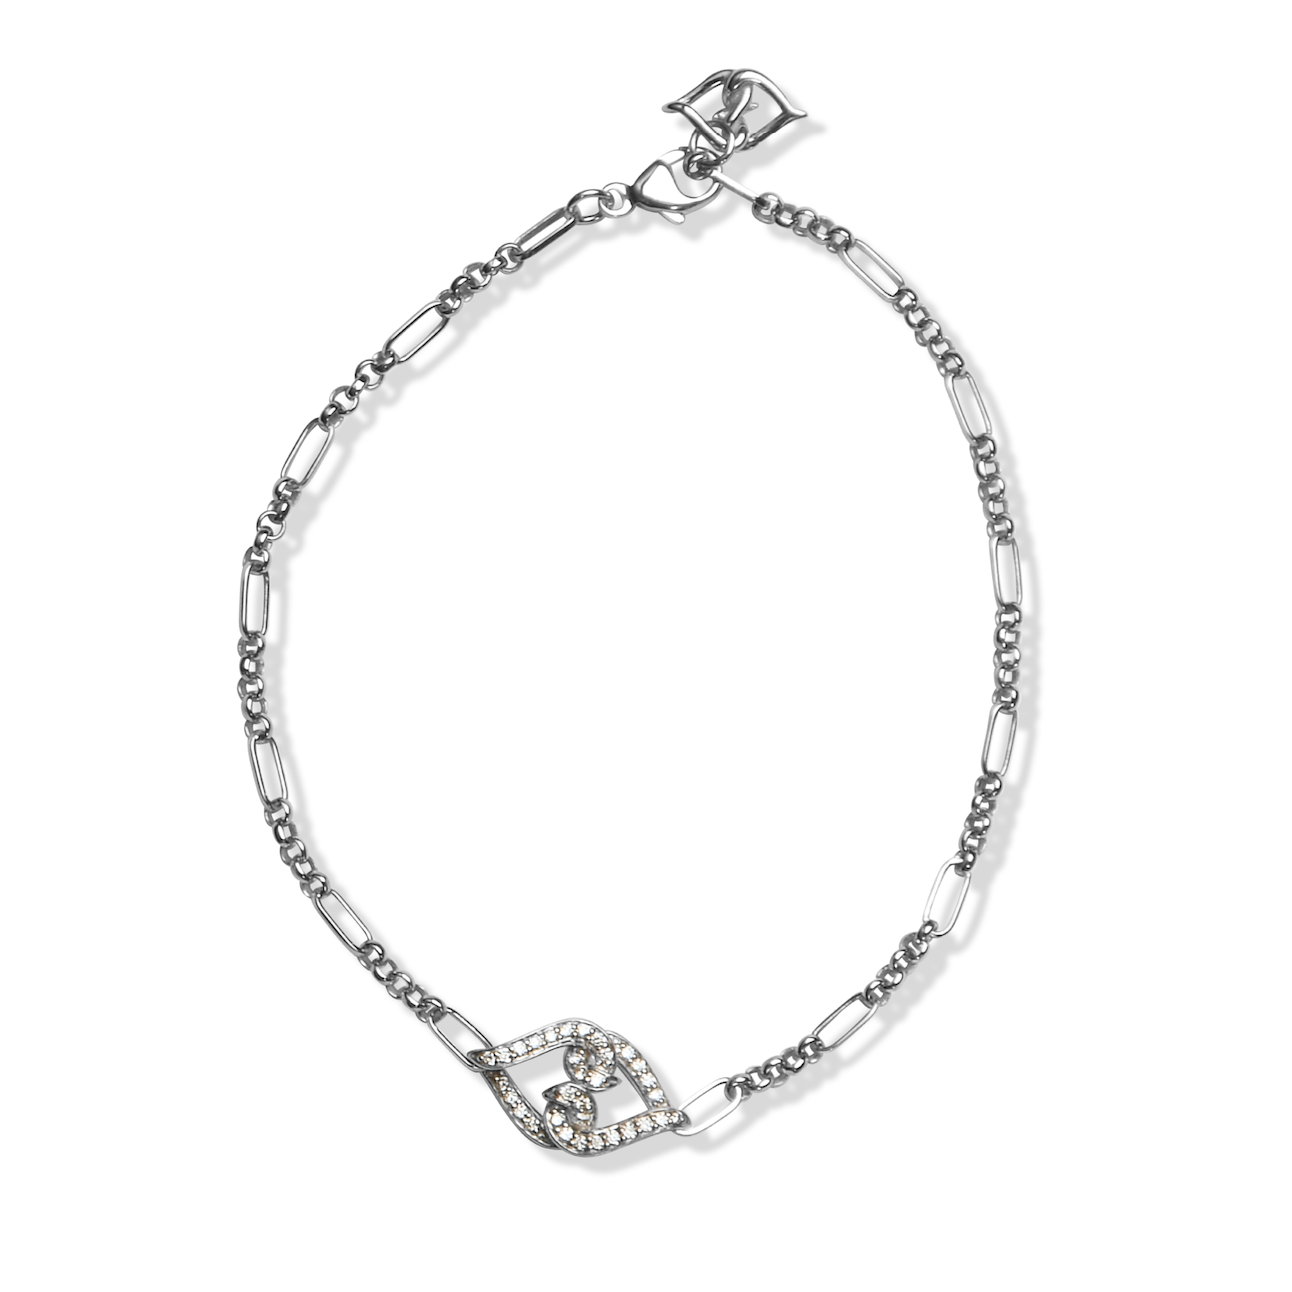 Silver Sapphire Bracelet | Sterling Silver Link Bracelet with White Sapphires